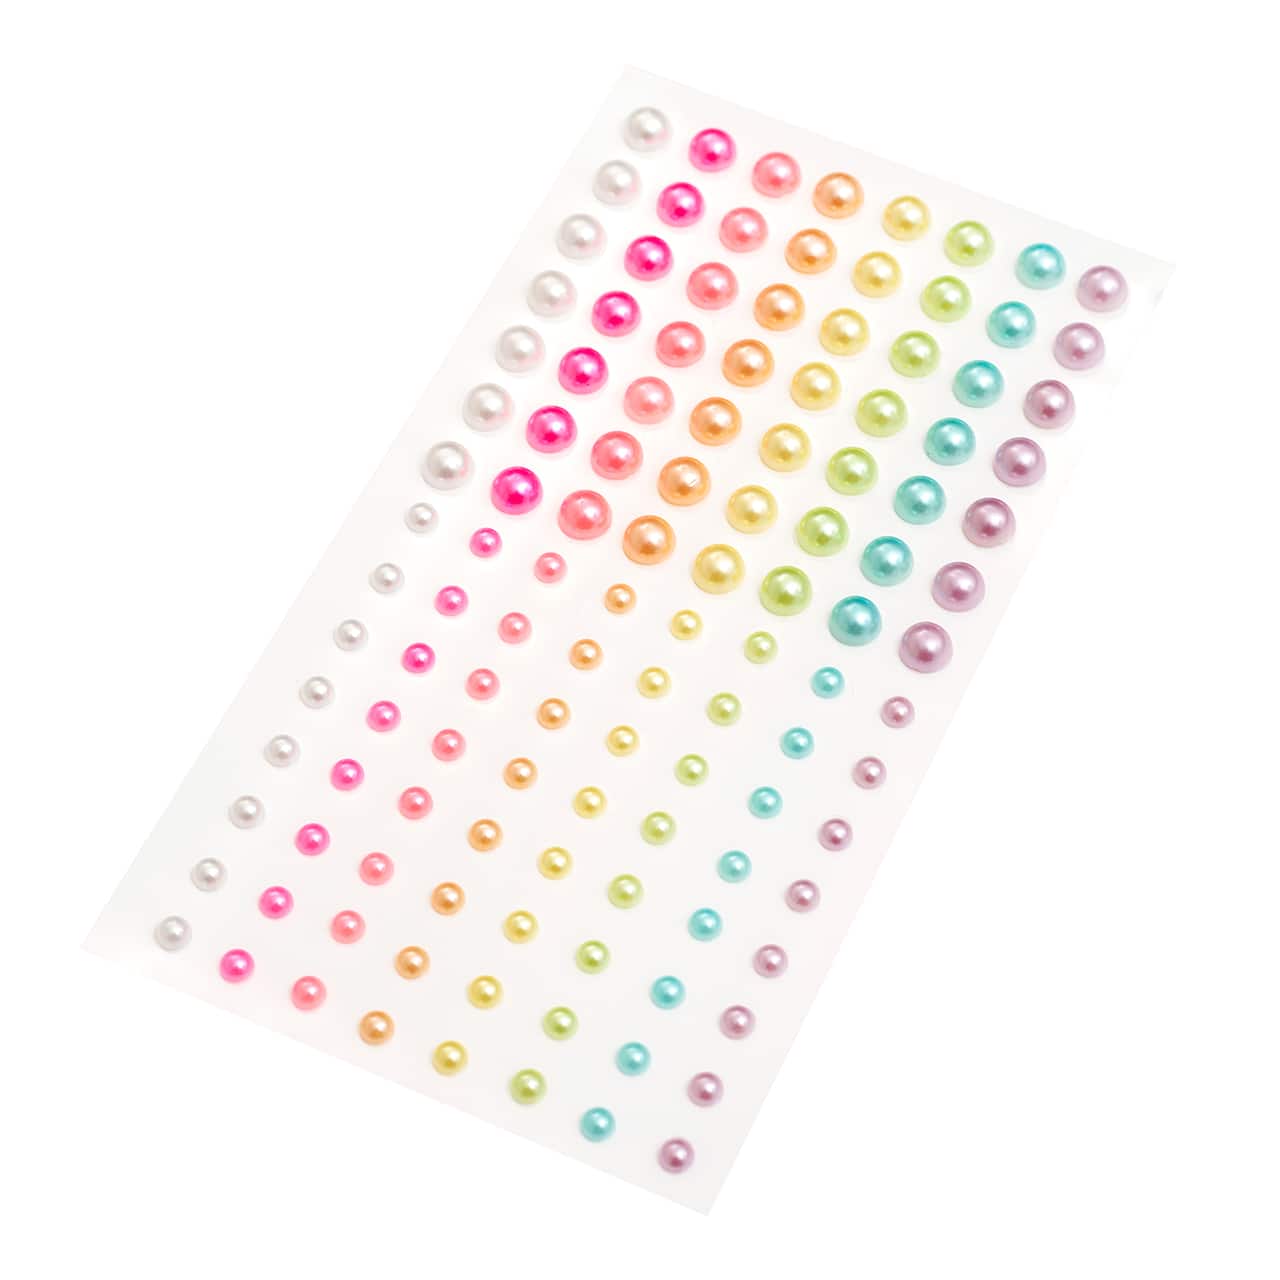 12 Packs: 120 ct. (1,440 total) Multicolor Pearl Stickers by